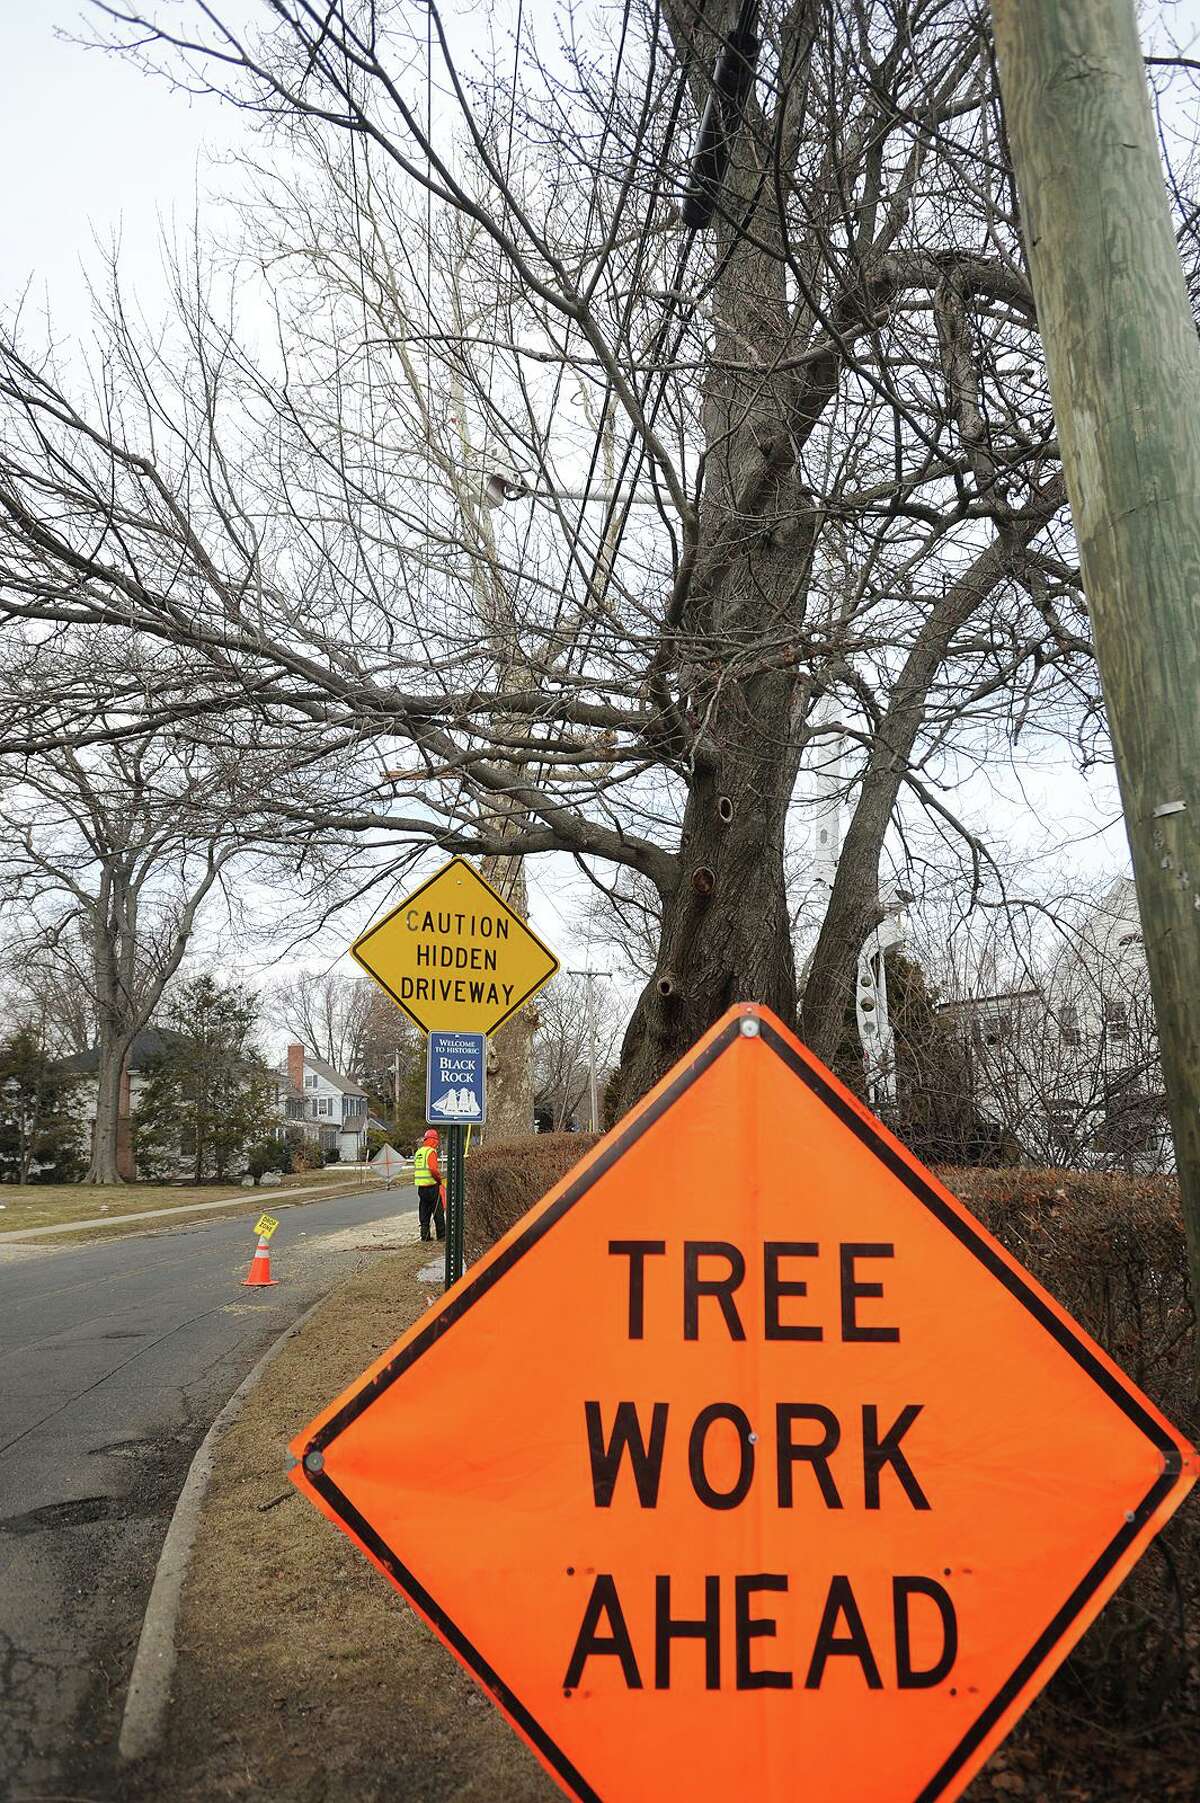 A crew from Lewis Tree Service cut down a large sycamore tree during United Illuminating tree trimming and removal on Grovers Avenue in the Bridgeport, Conn. in 2015.